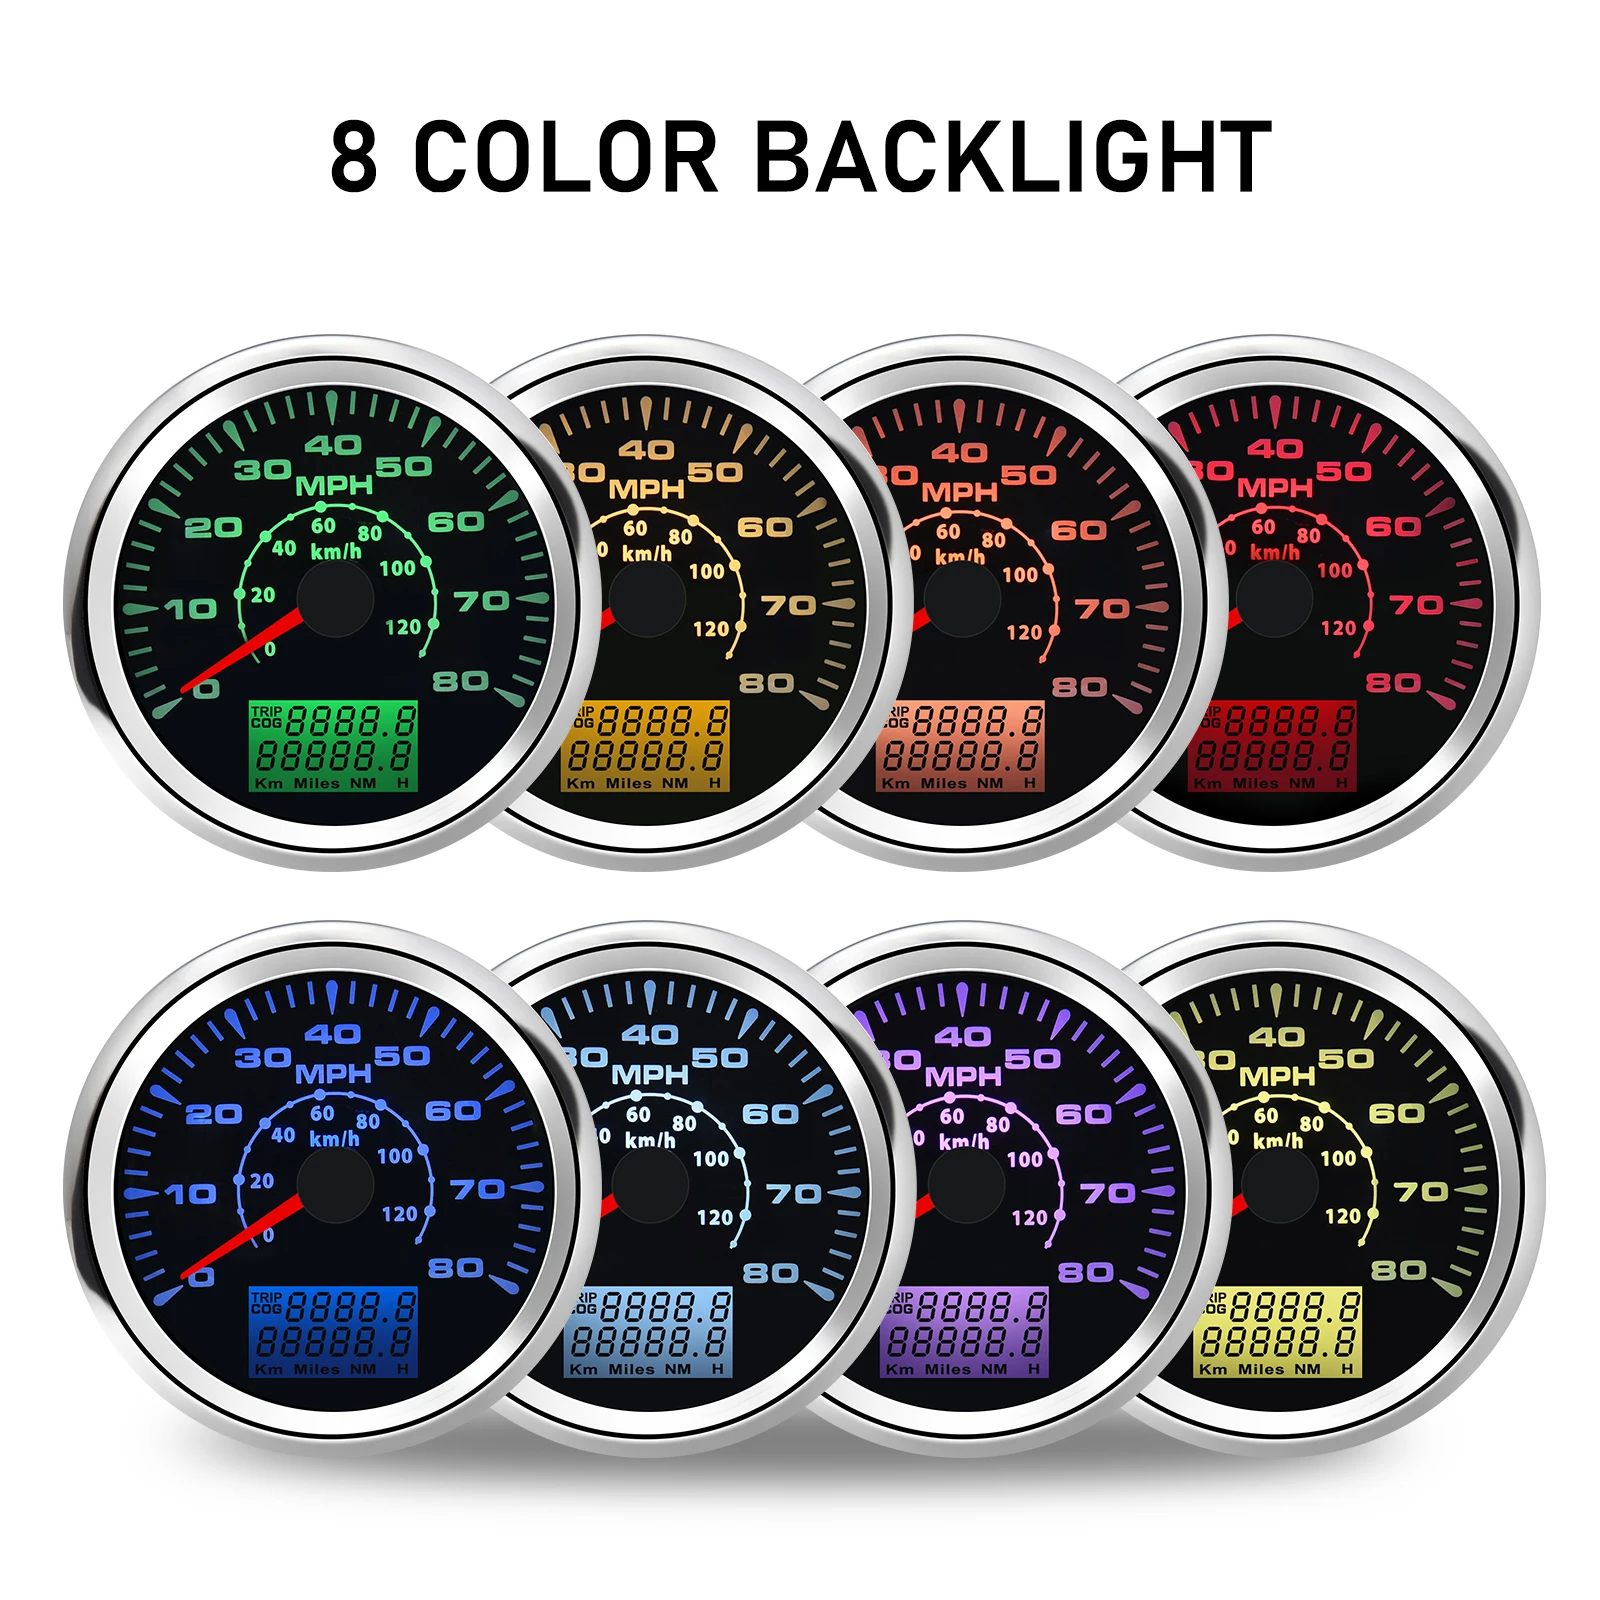 

Universal 85mm Auto Marine Boat MPH GPS Speedometer Odometer 80MPH 120km/h Speed Gauge With 7 colors Backlight Waterproof 9-32V